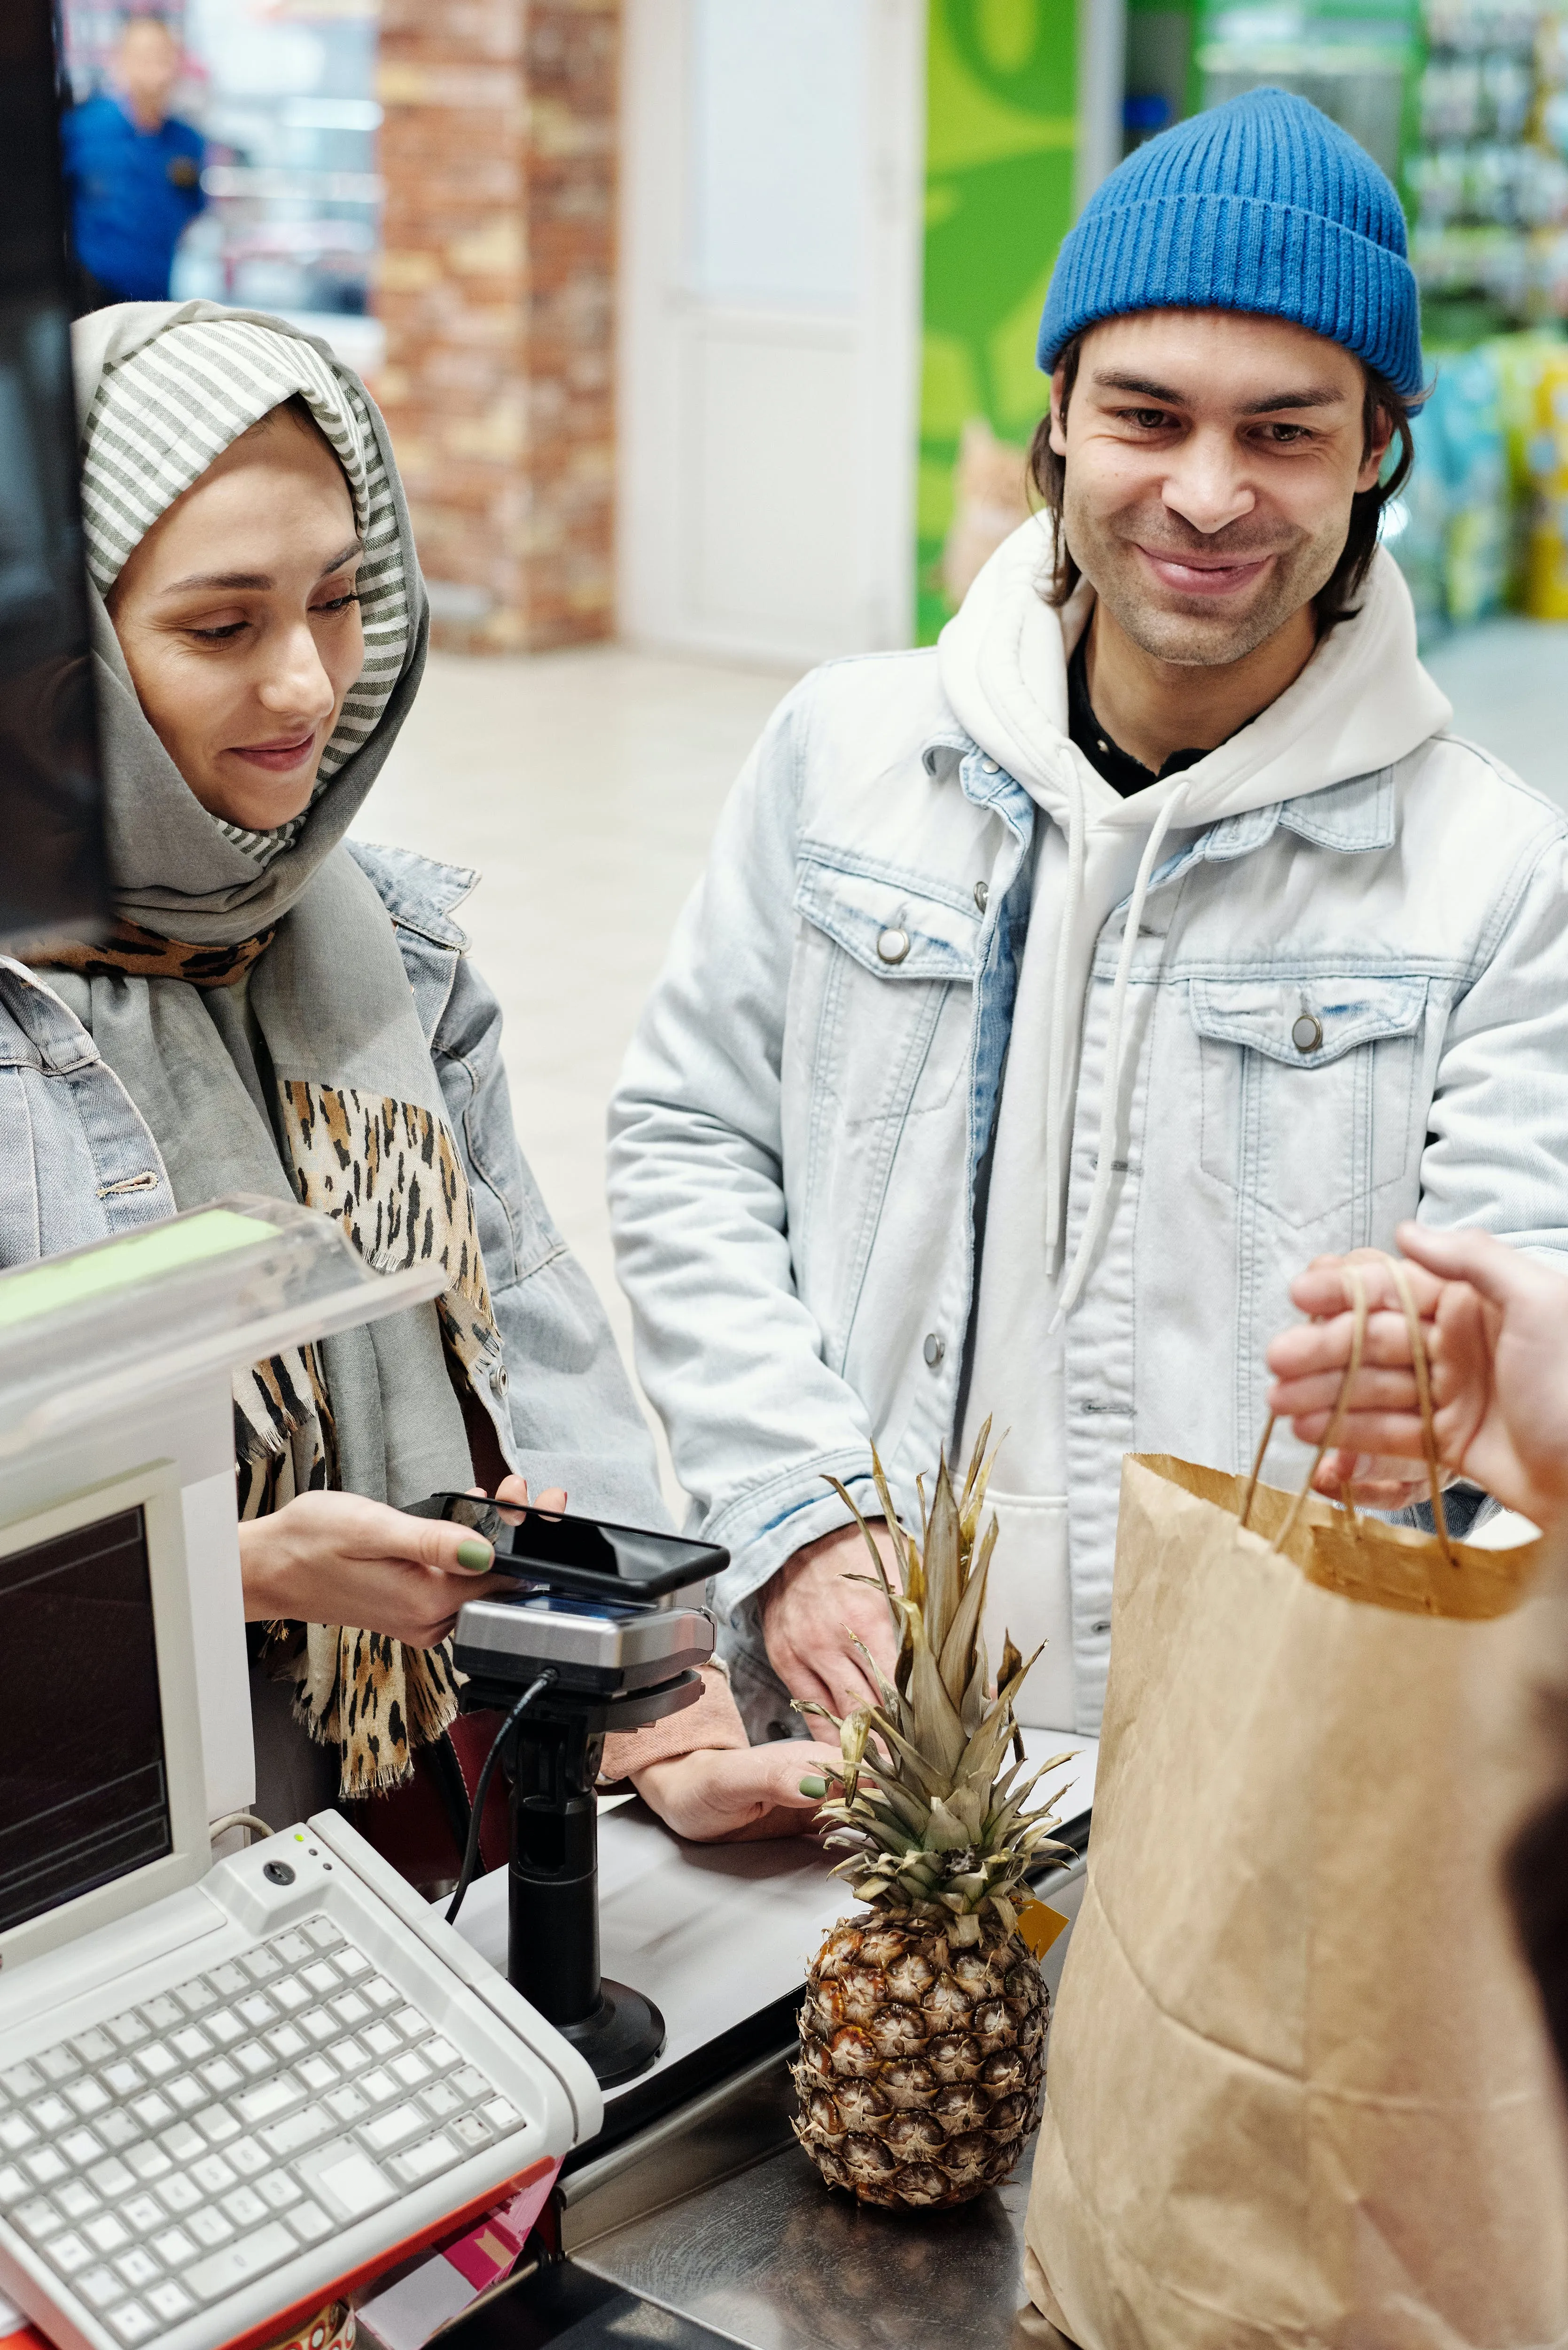 The Future of Retail: Personalization and Technology